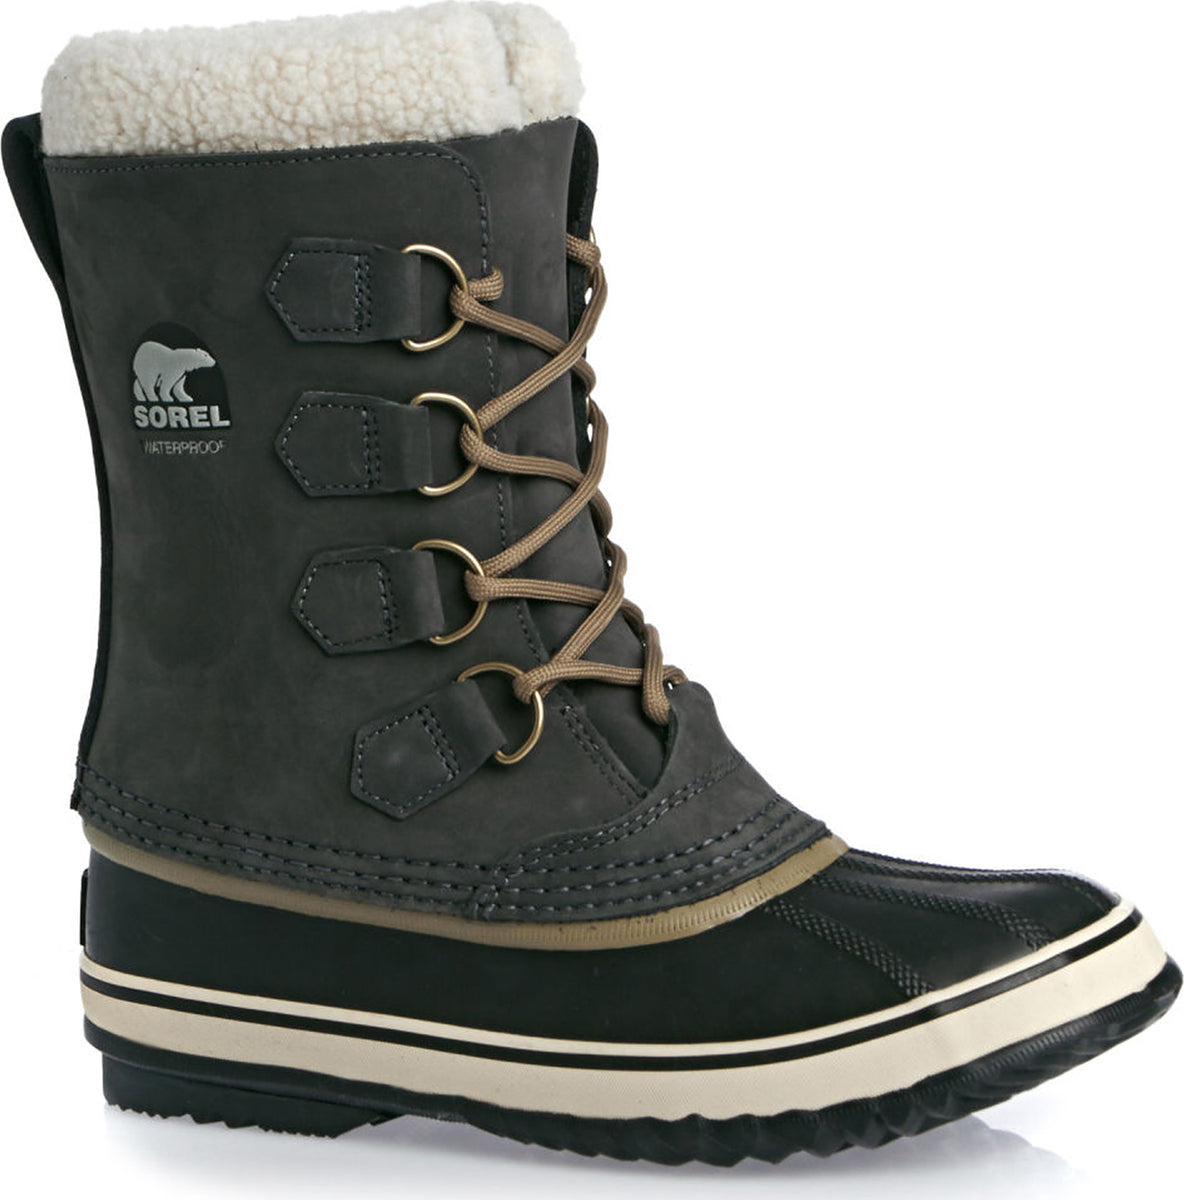 sorel safety boots